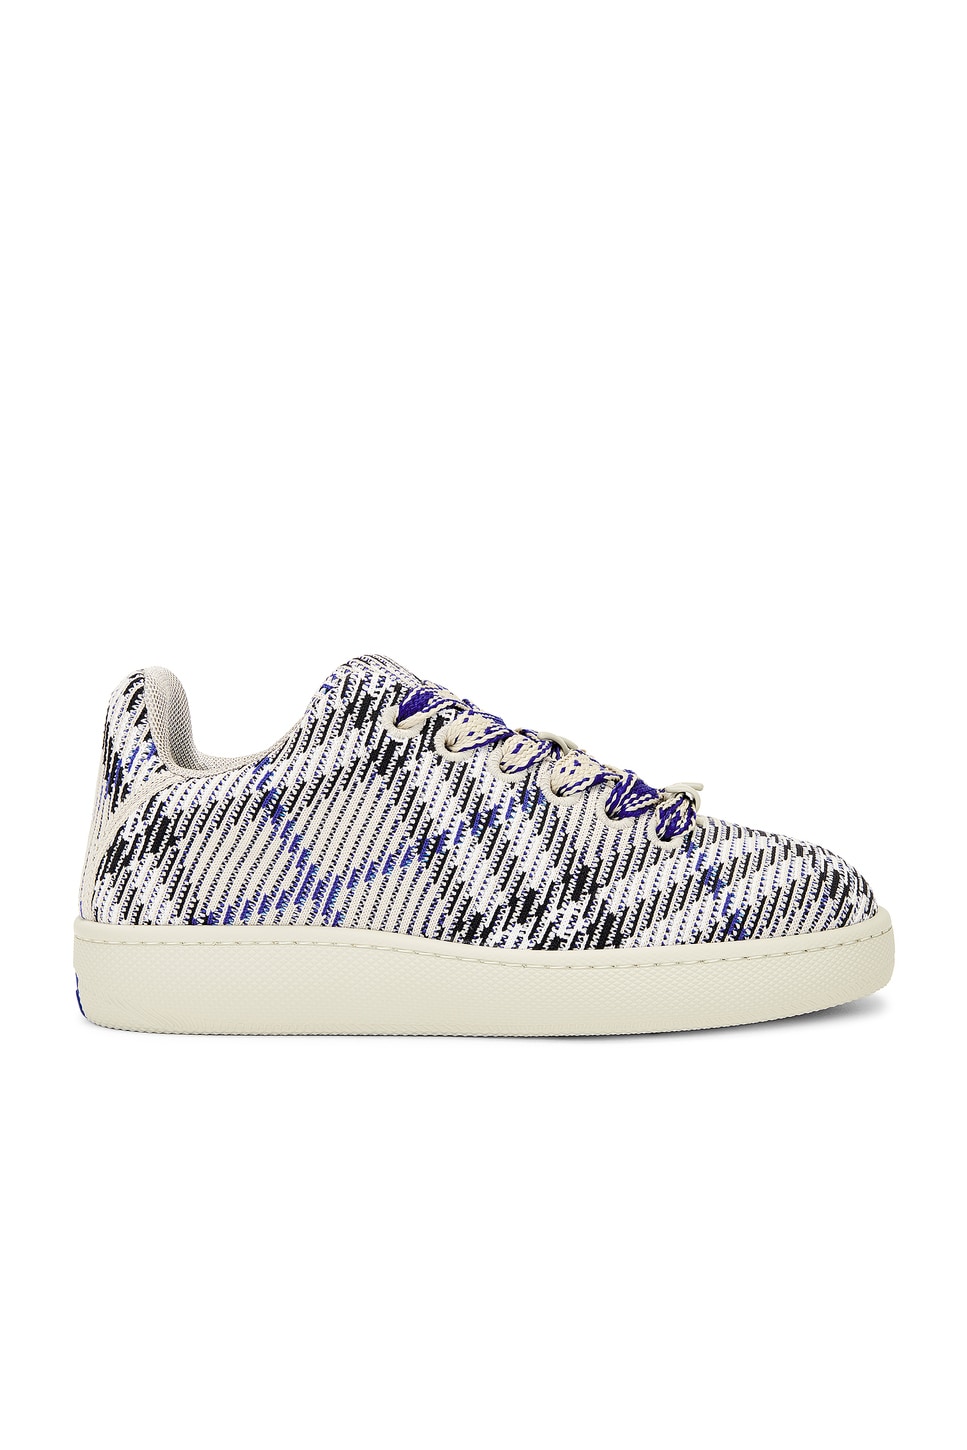 Image 1 of Burberry Sneaker in Lichen Ip Check